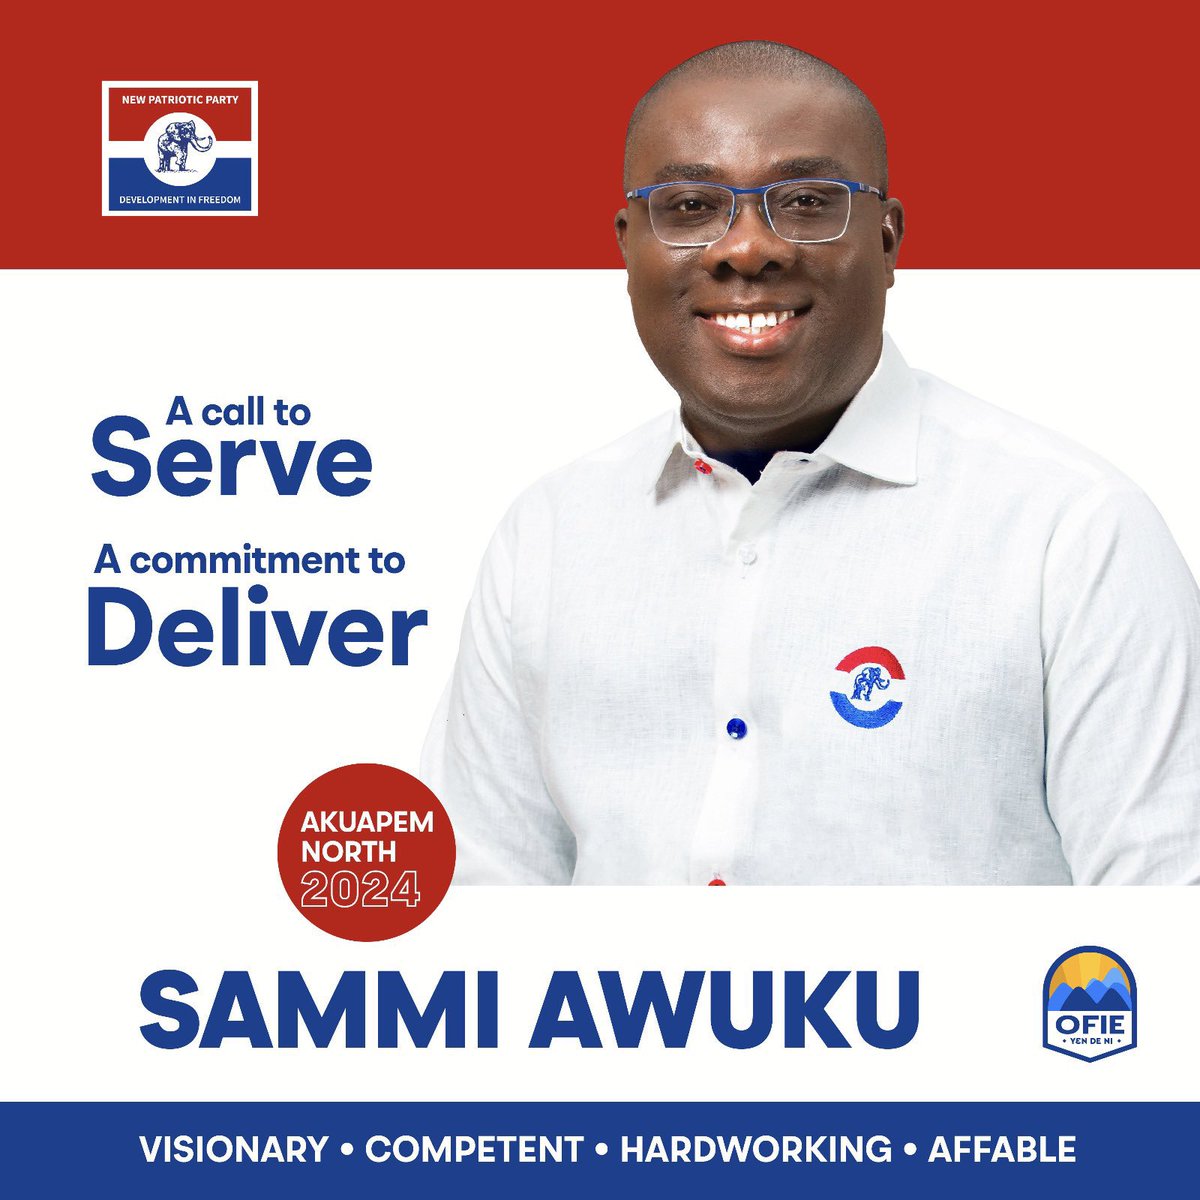 A vote for @sammiawuku is a vote of hope for the grassroots, a vote to encourage sacrifice, and a vote to encourage commitment,  dedication, and development for 2024 and beyond. 

Breaking the 8 with Dr.Bawumia ‼️

#BuildingGhanaTogether 
#AkuapemNorth2024
#ItIsPossible 
🇳🇱🐘‼️